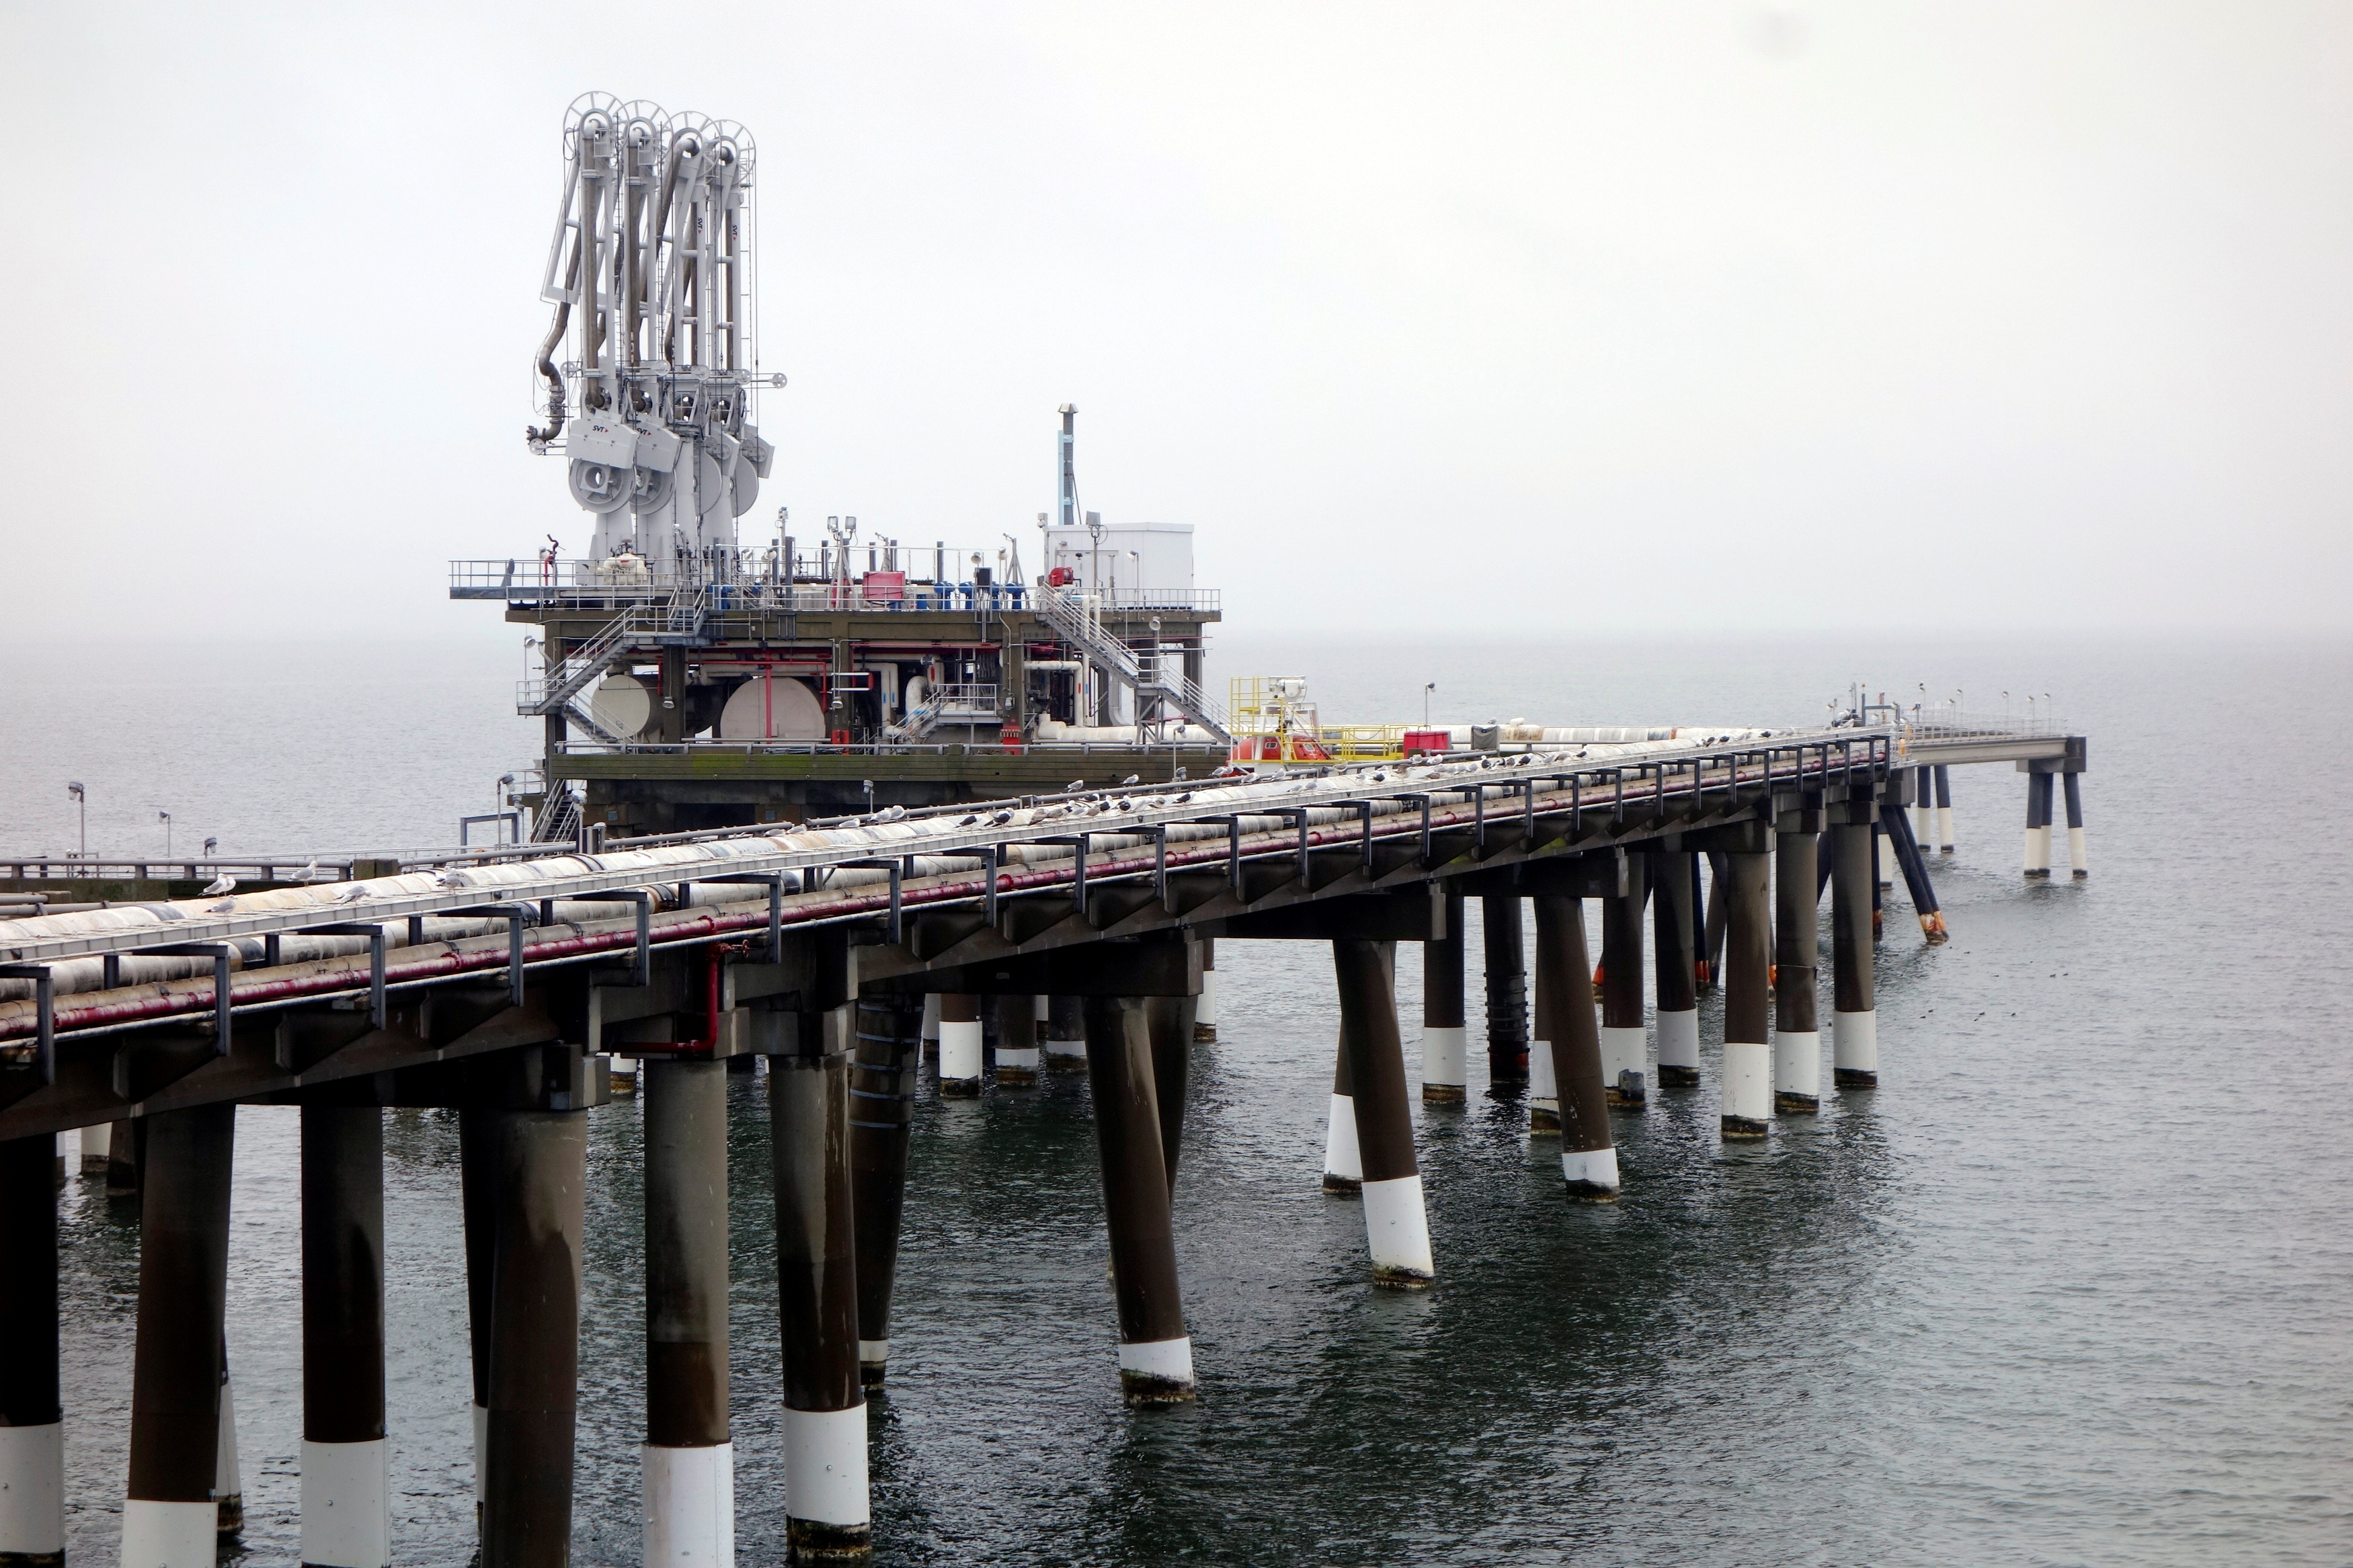 The pier at Dominion's Cove Point liquefied natural gas (LNG) plant on Maryland's Chesapeake Bay is seen in this picture taken February 5, 2014.  REUTERS/Timothy Gardner/File Photo